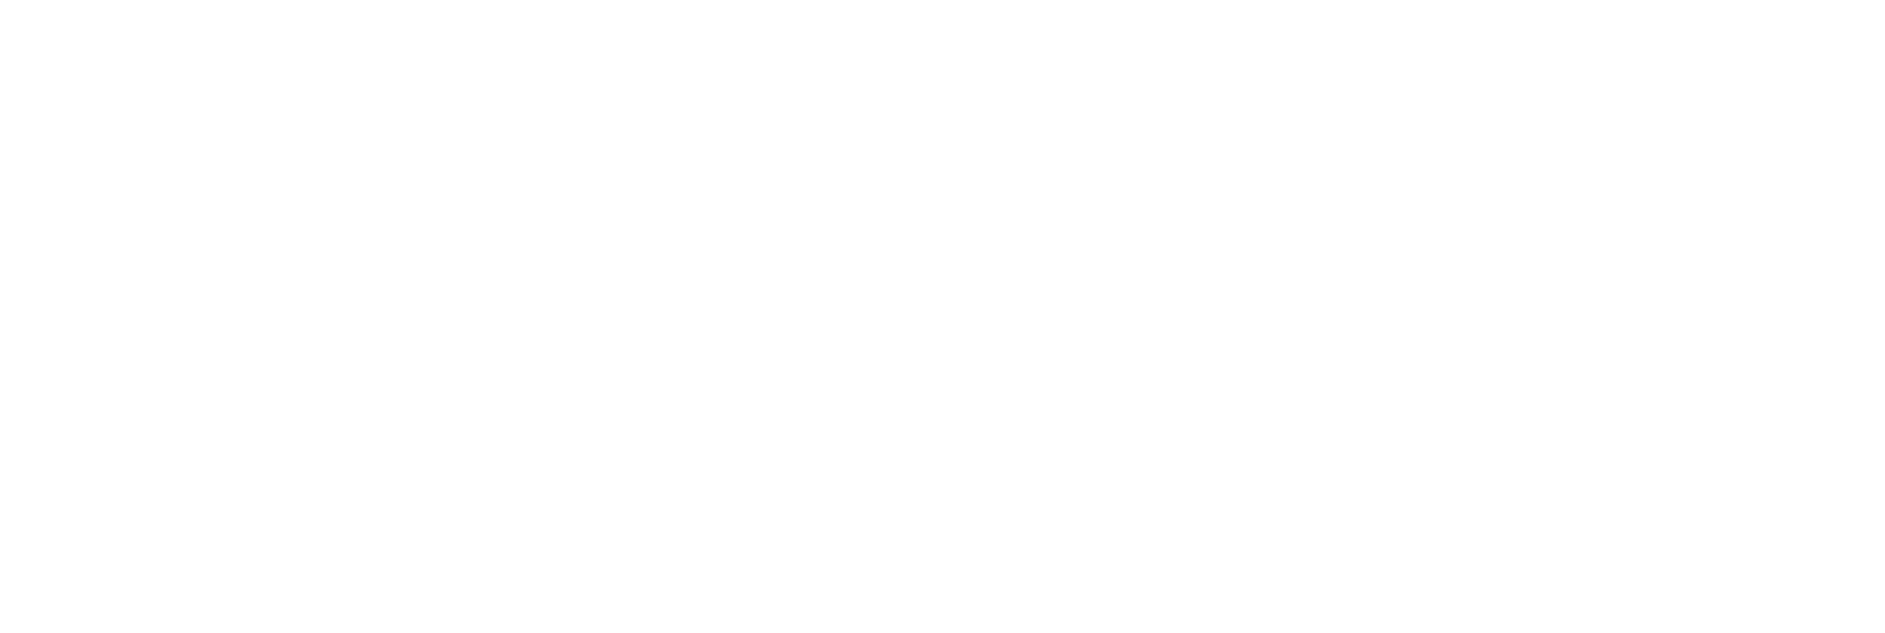 PayPal Accepted Logo - Buying Online and Paying with PayPal